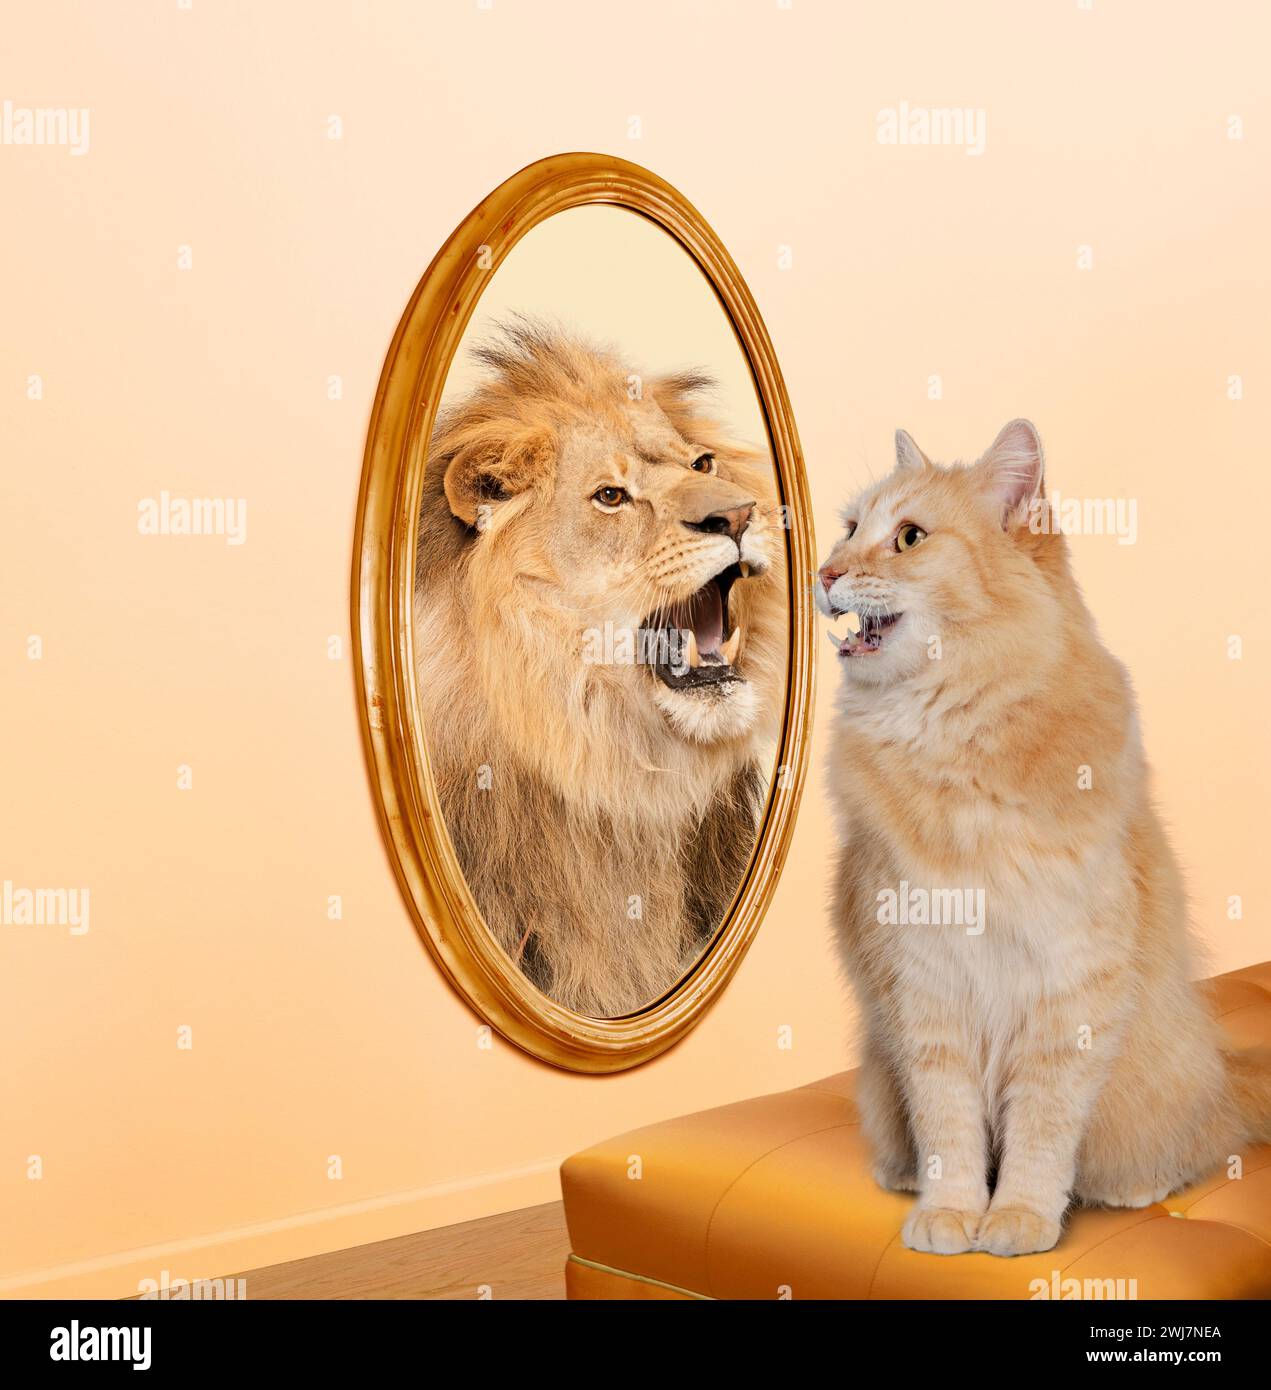 A tabby cat looks in the mirror and sees his reflection as a lion in an image of confidence, self-esteem, and personal growth. Stock Photo